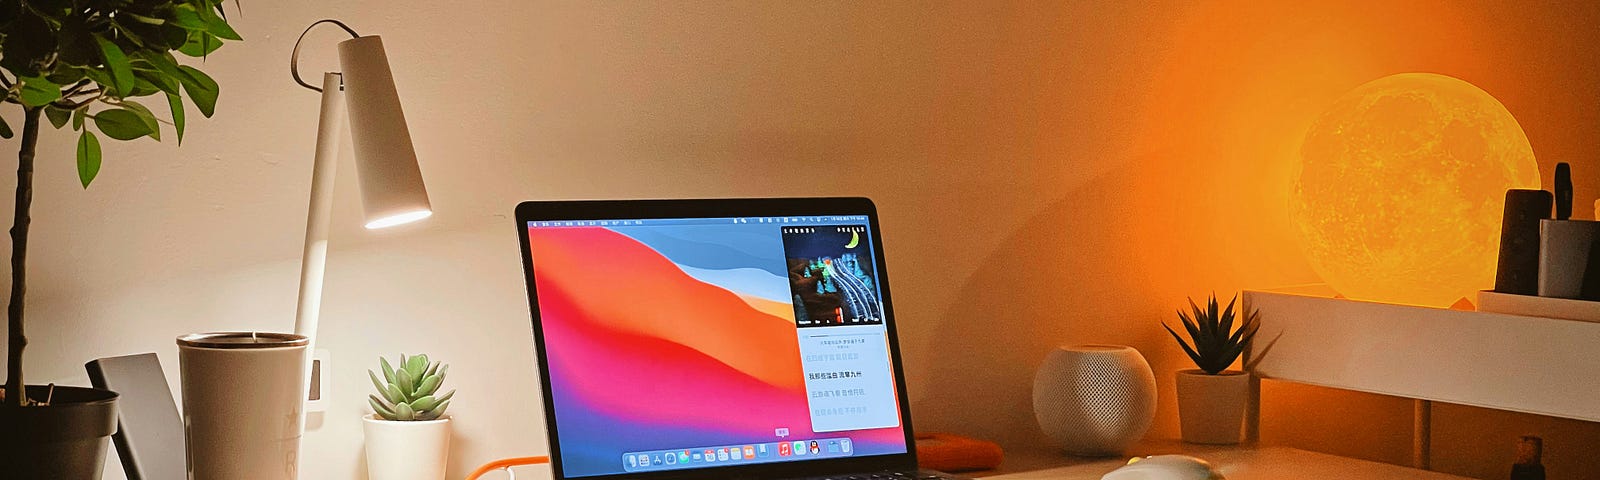 This image depicts a book, a lamp, and a laptop on top of a desk.